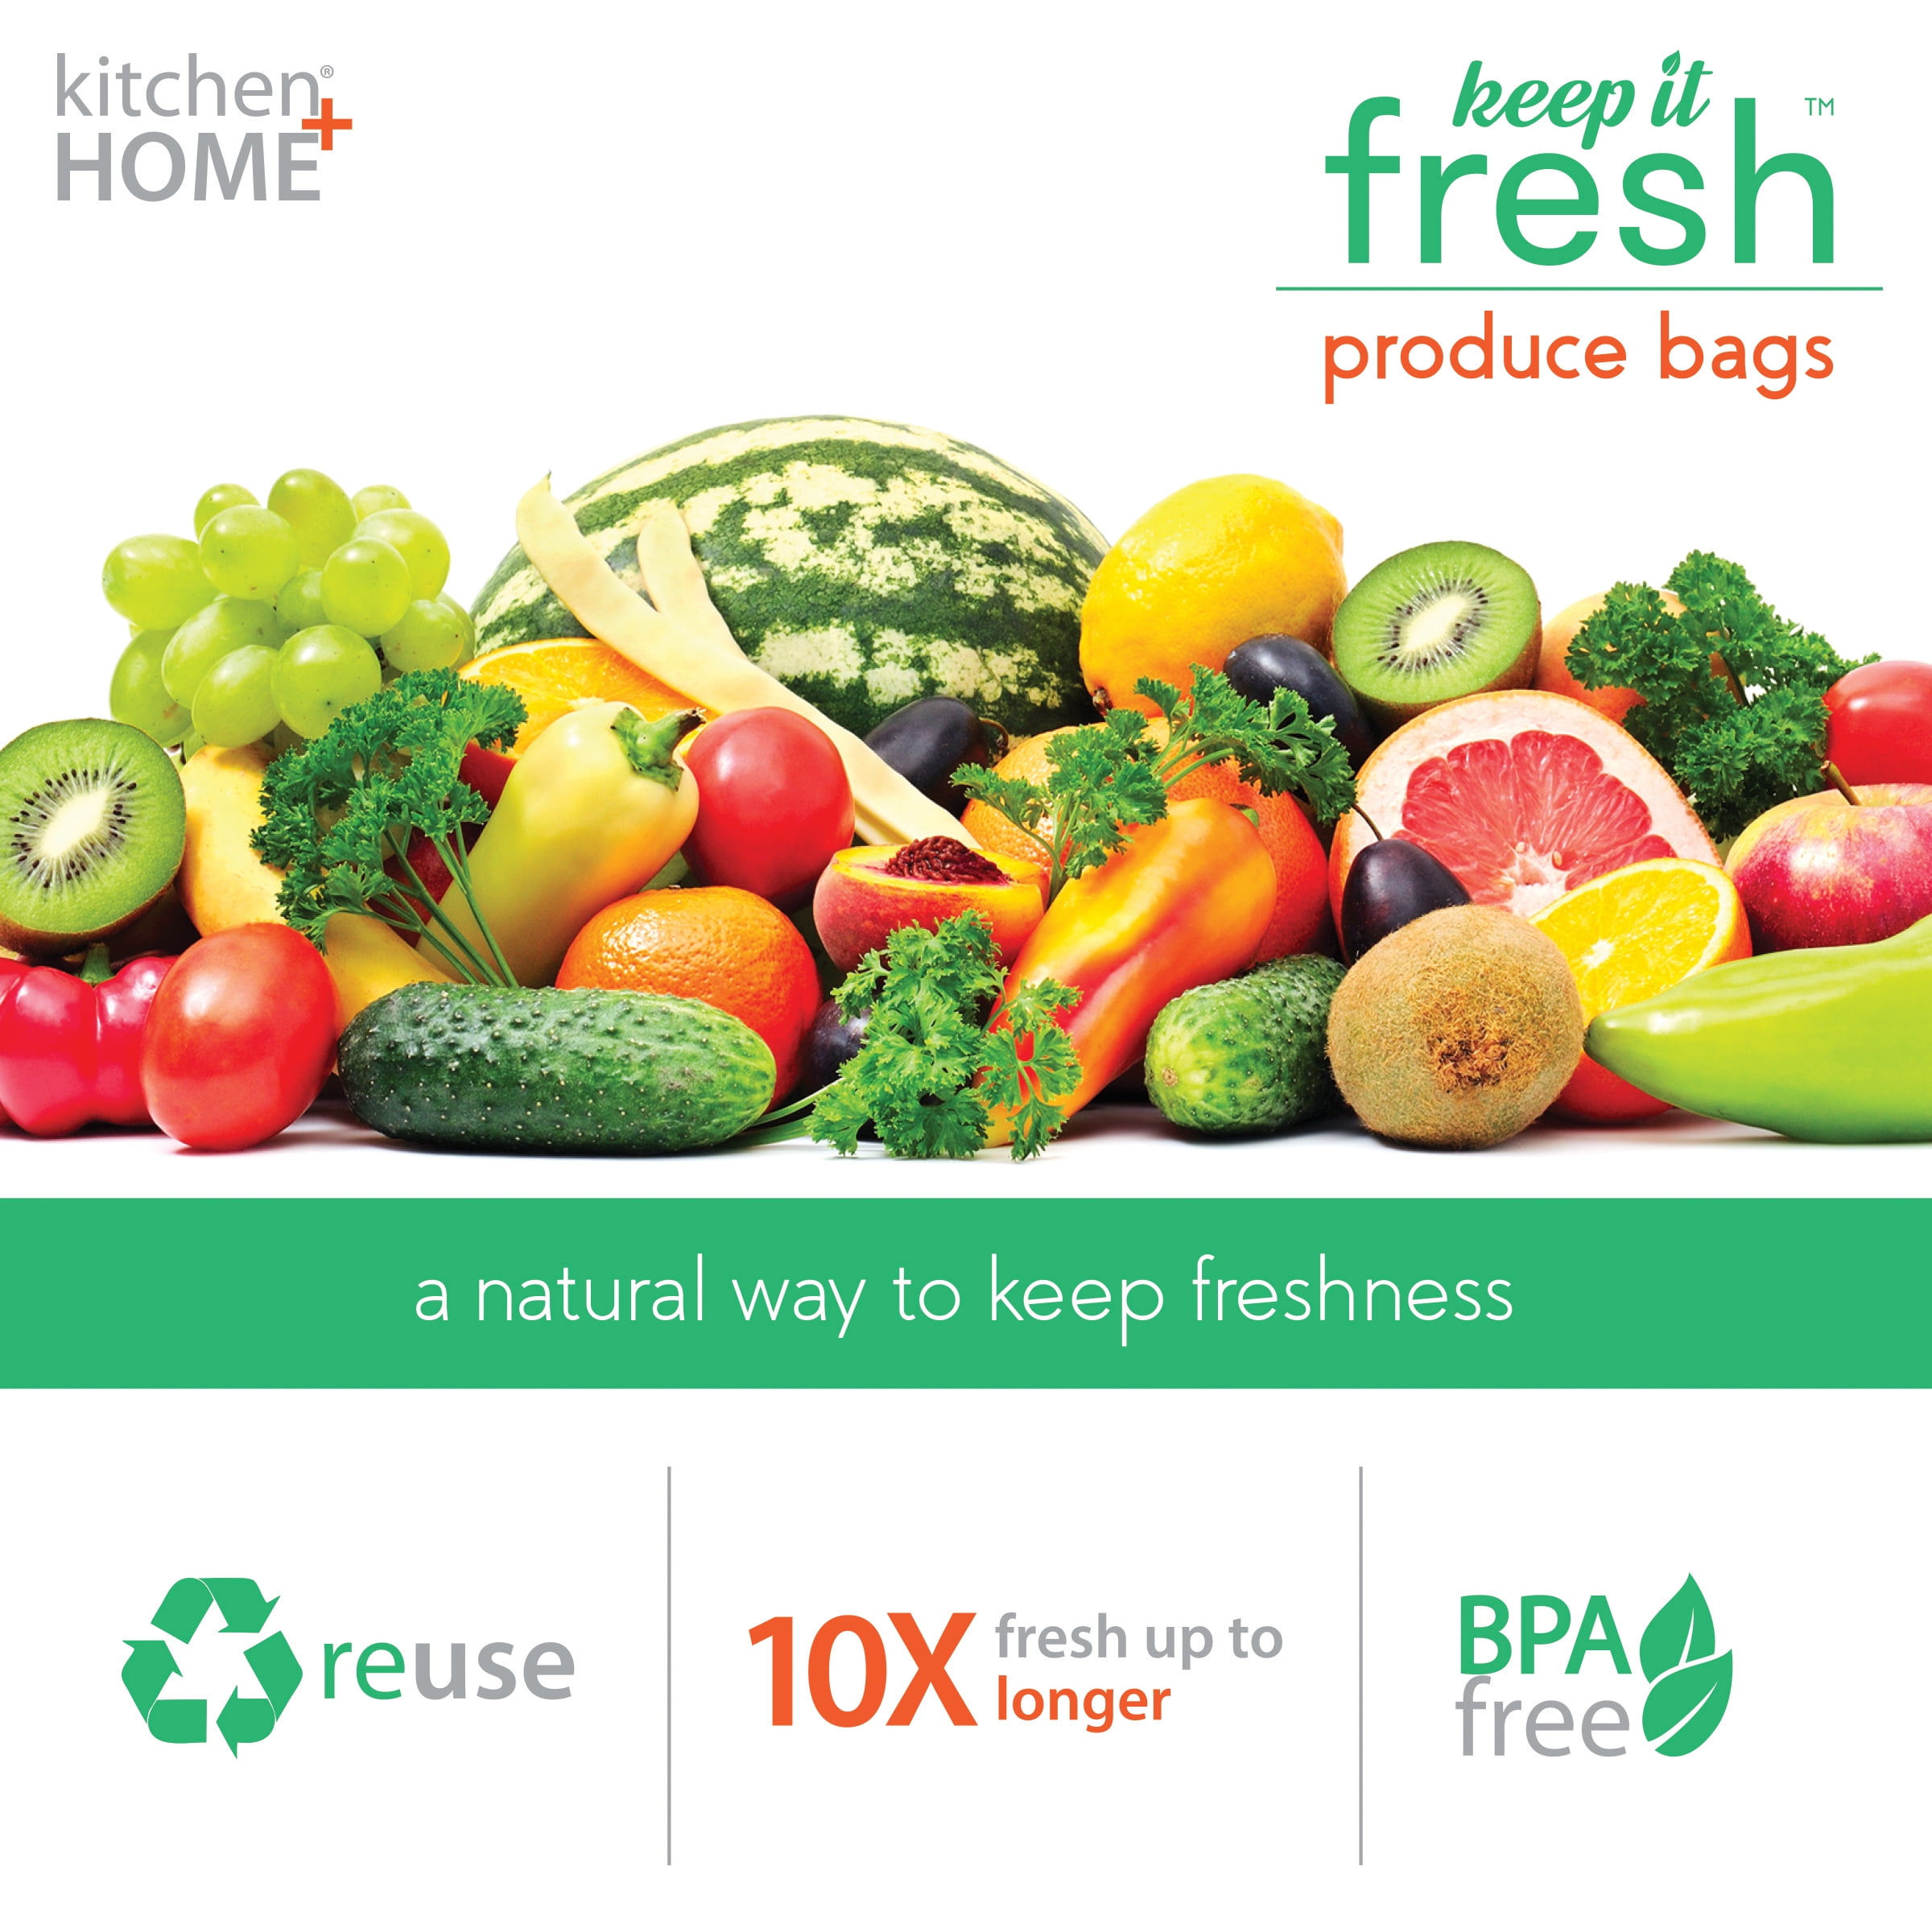 20 Storage Vegetable Fruit and Produce Green fresh Bags Reusable Life 